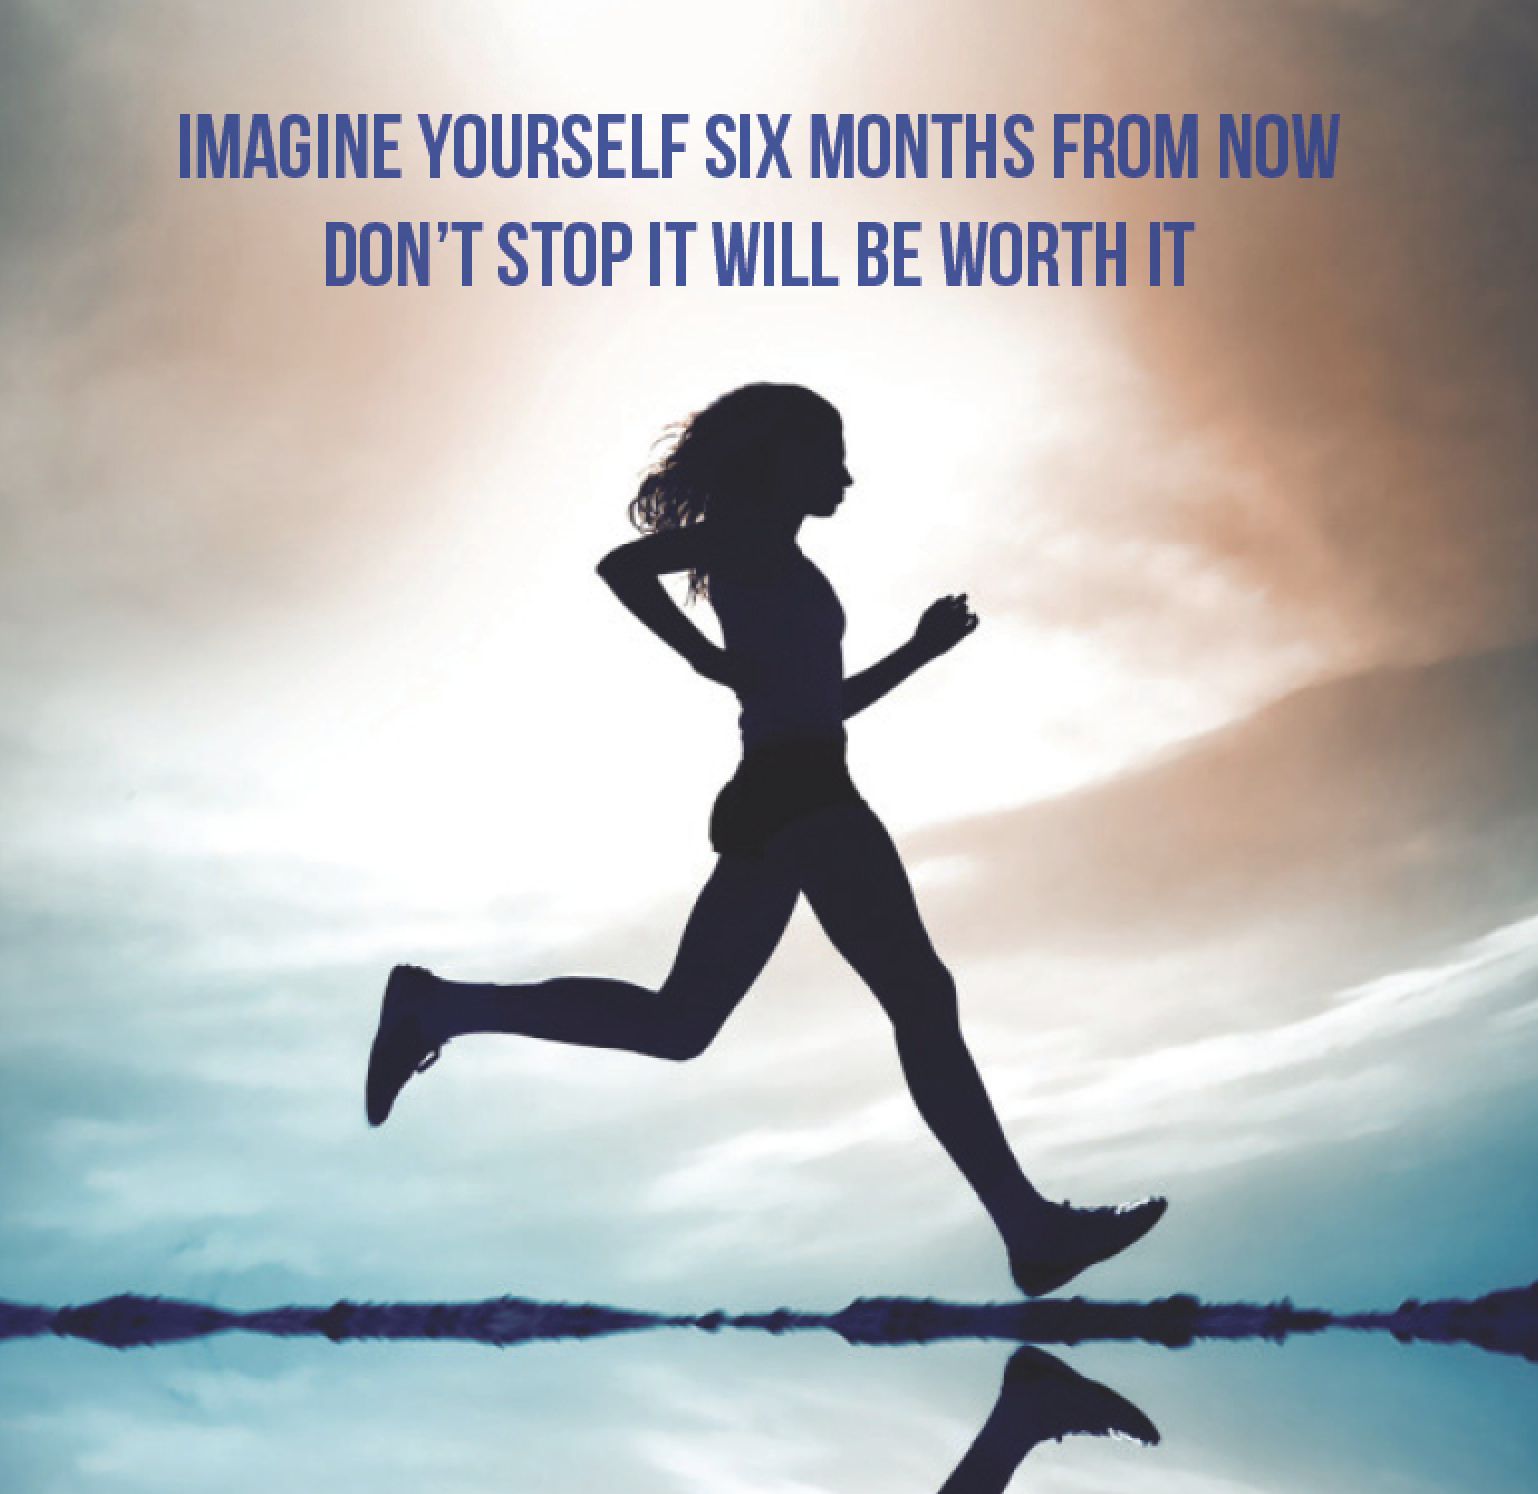 Imagine yourself - Living Fit Lifestyle